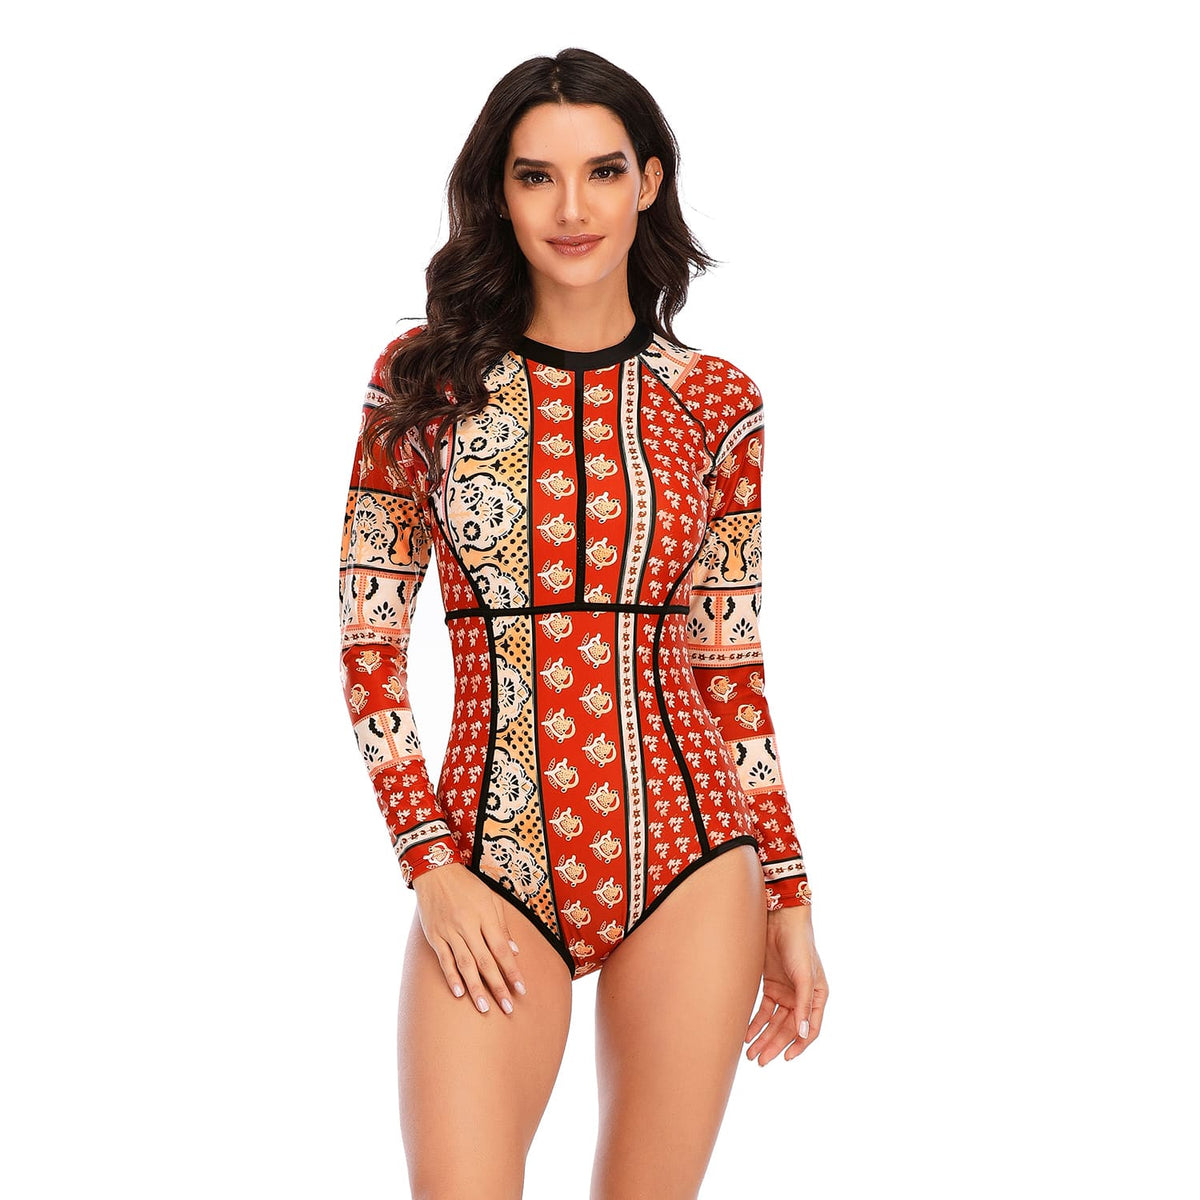 Long Sleeve Swimsuit Retro Printed One Piece Bathing Suit